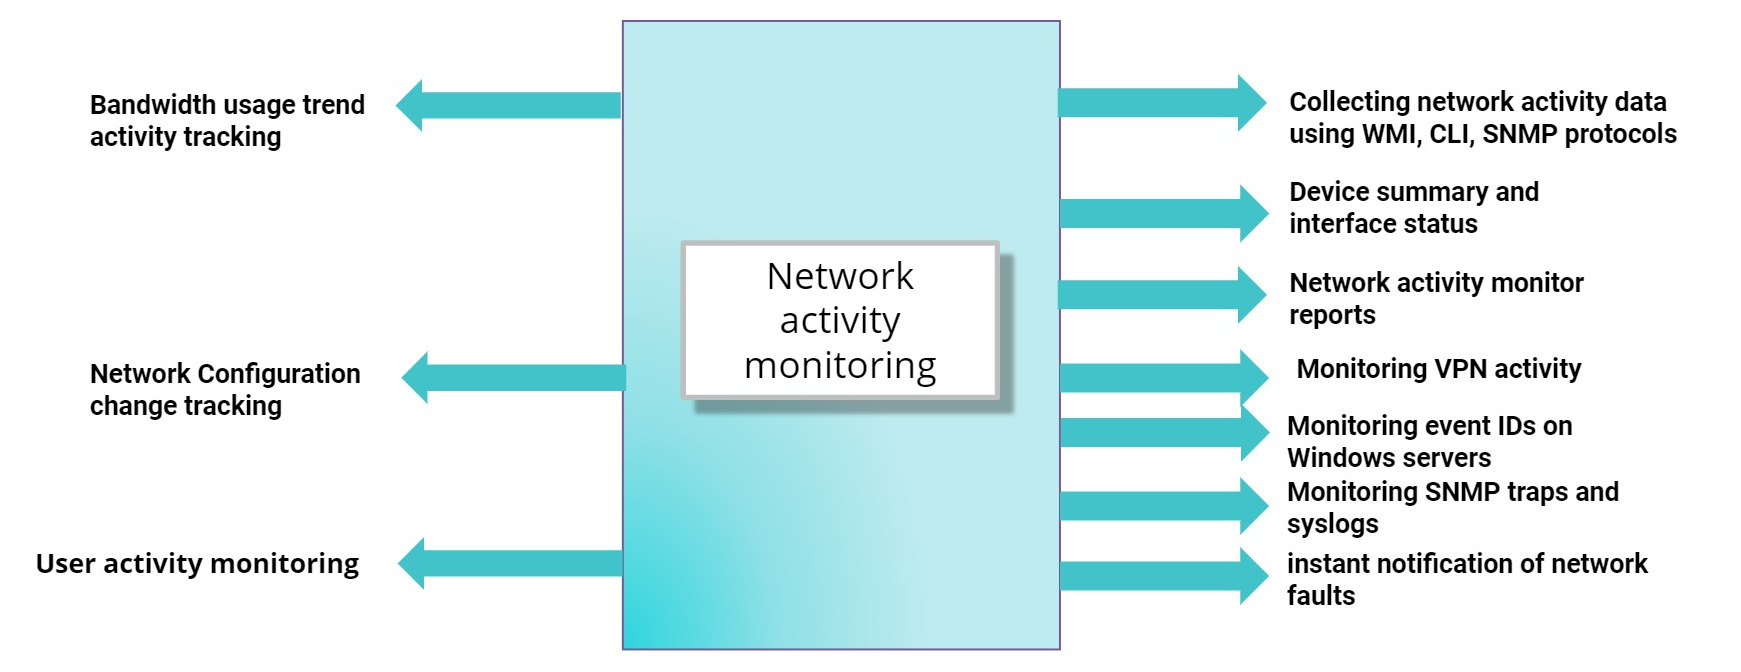 bandwidth monitoring tool for network